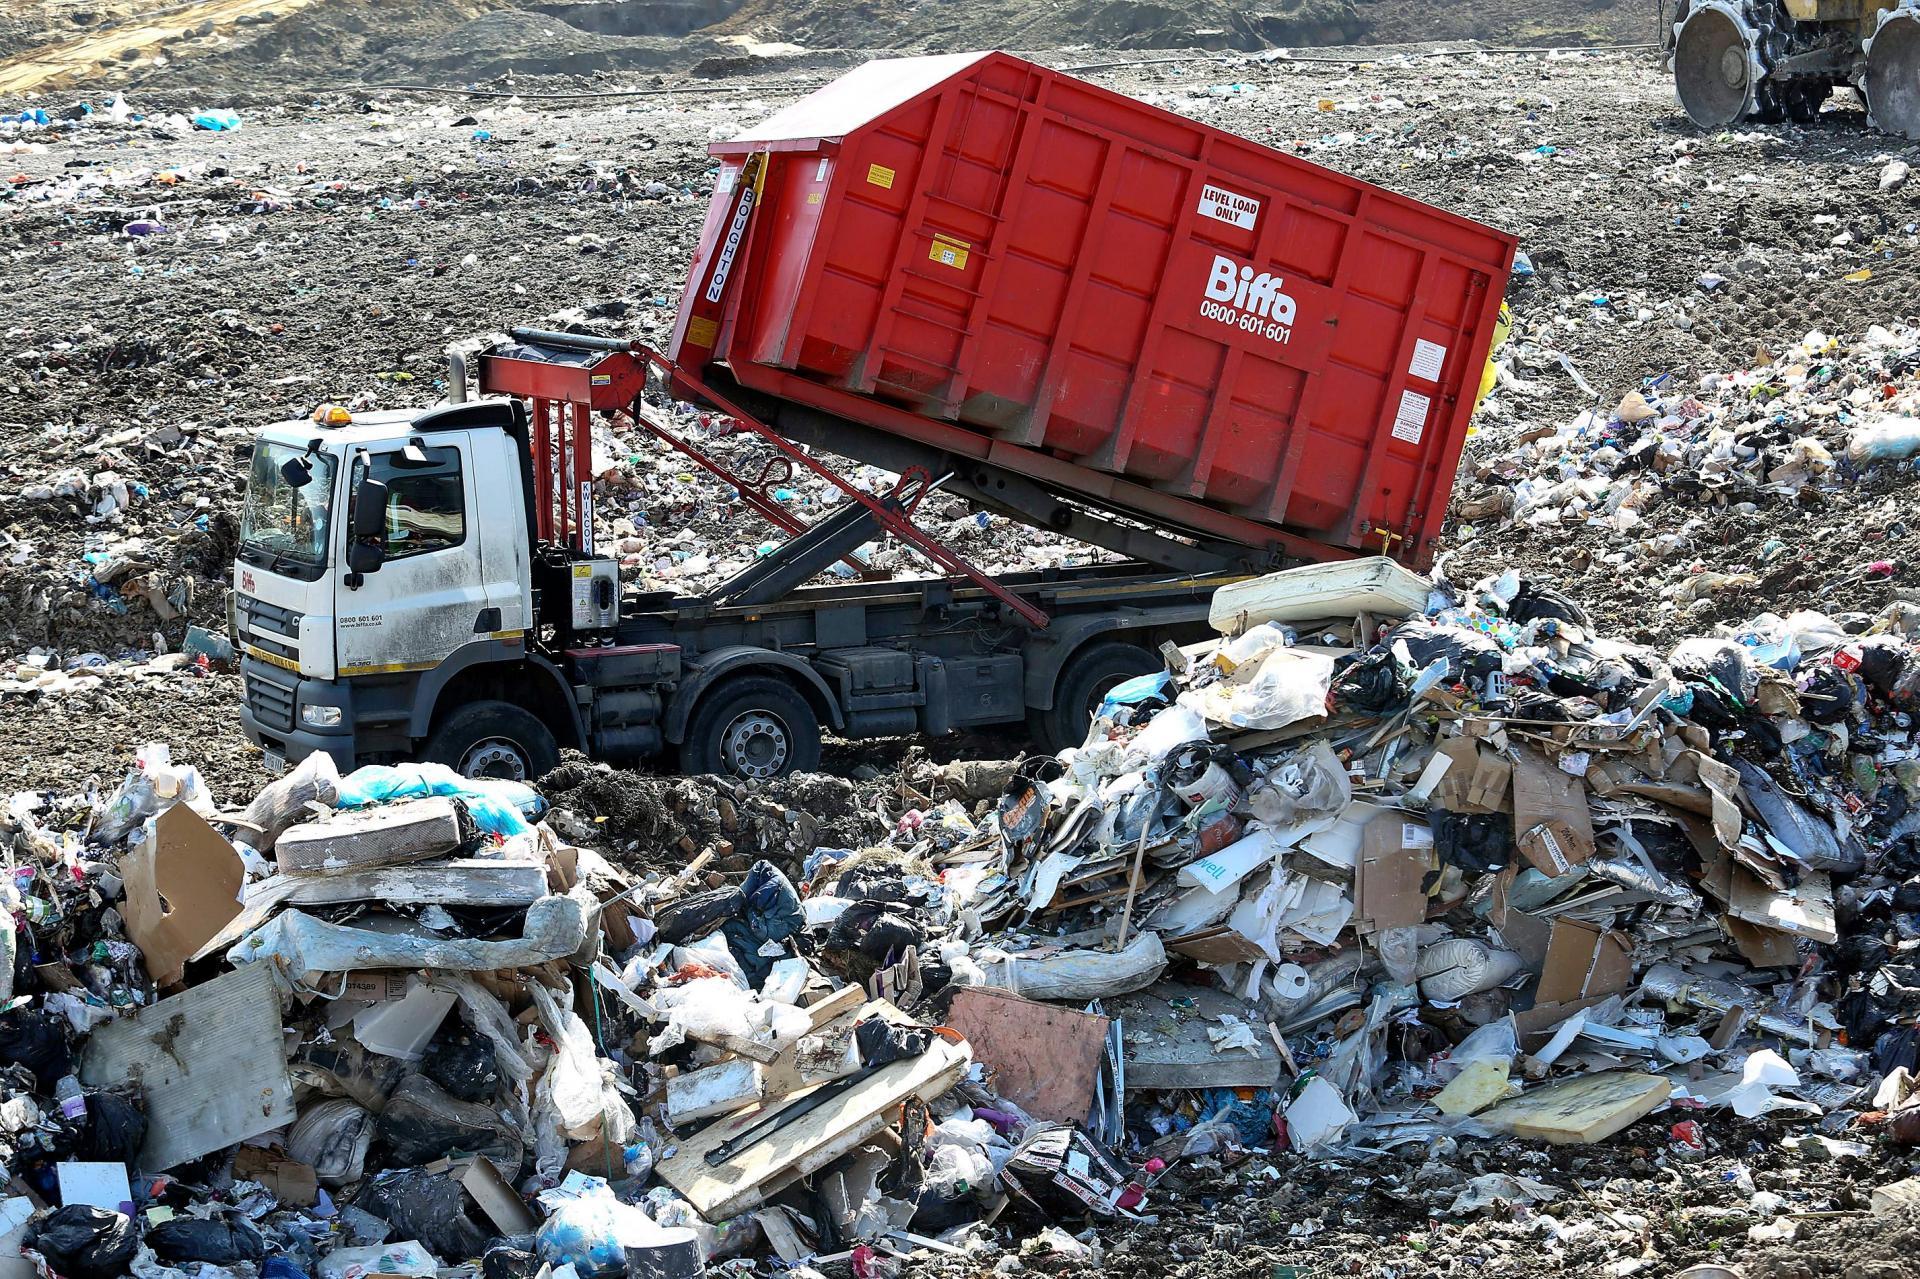 Biffa acquisition boosts recycling capability